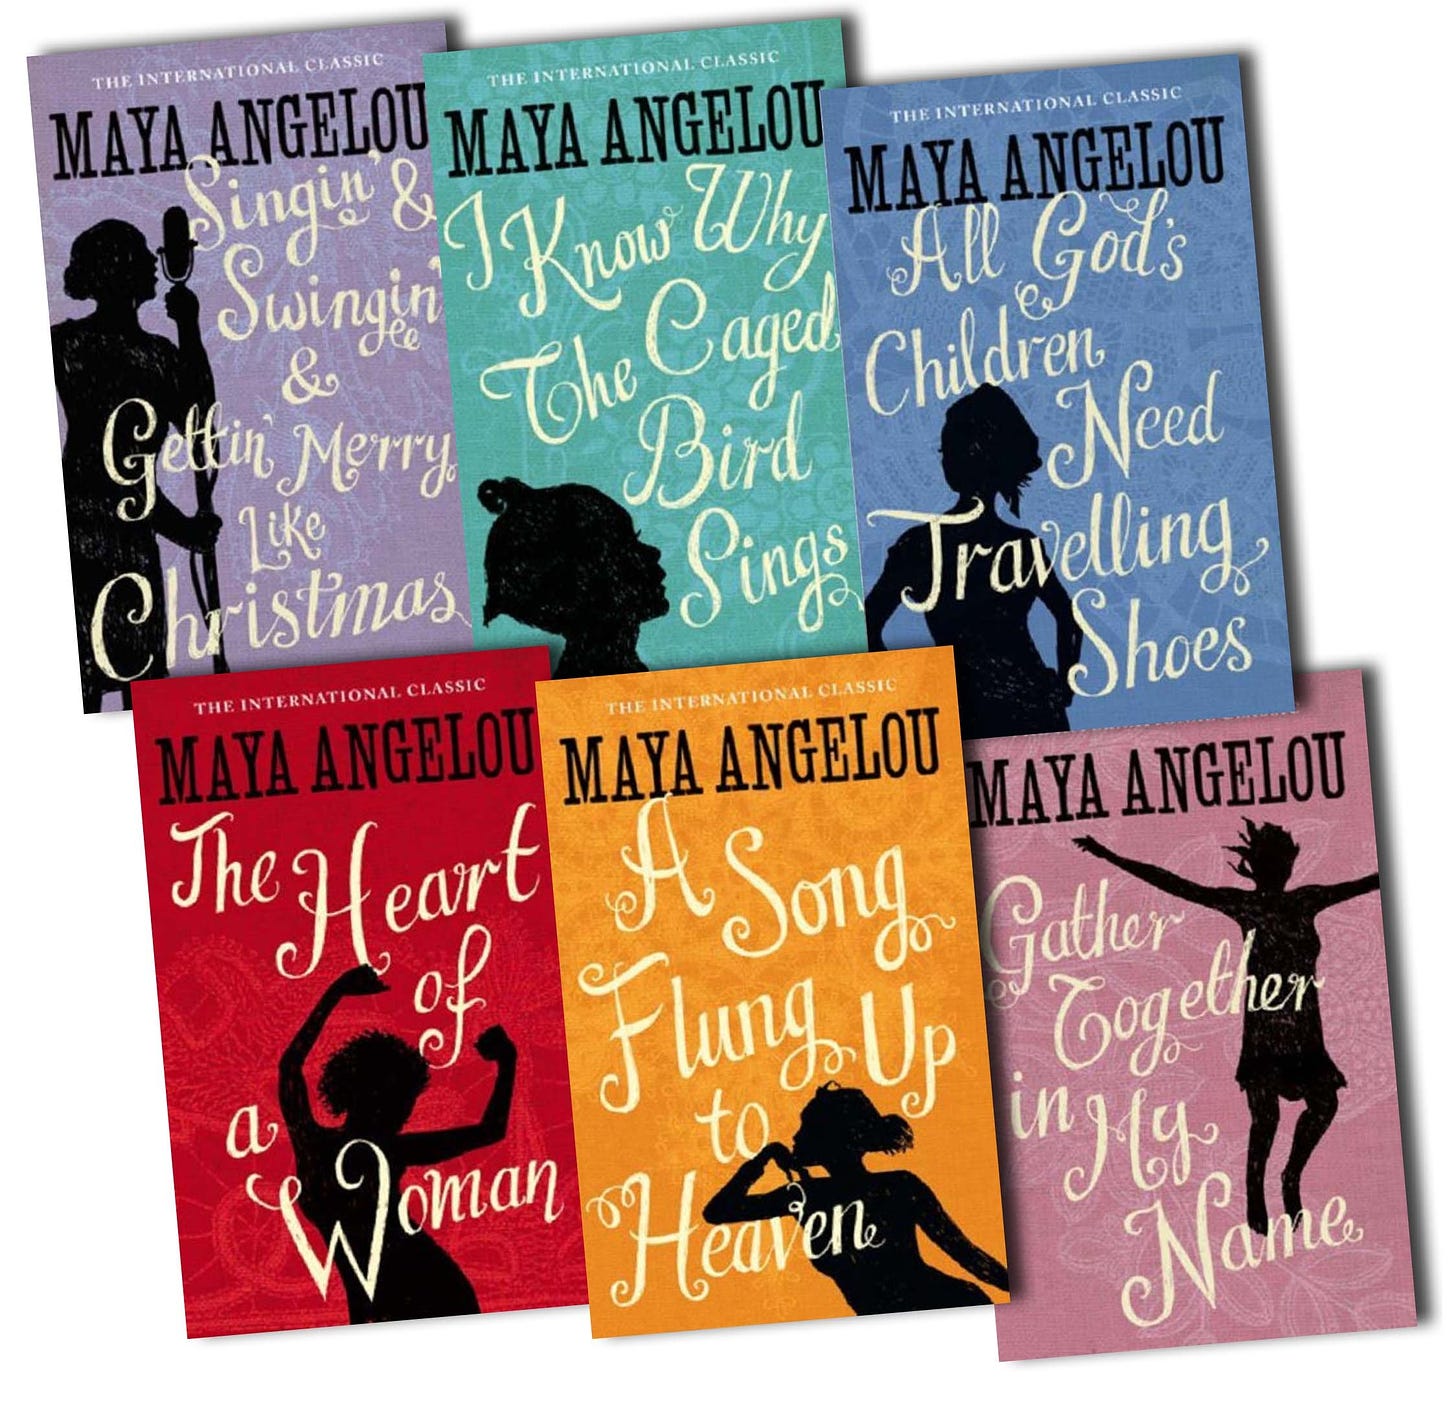 A Complete List of Maya Angelou Books Rated From Best To Worst